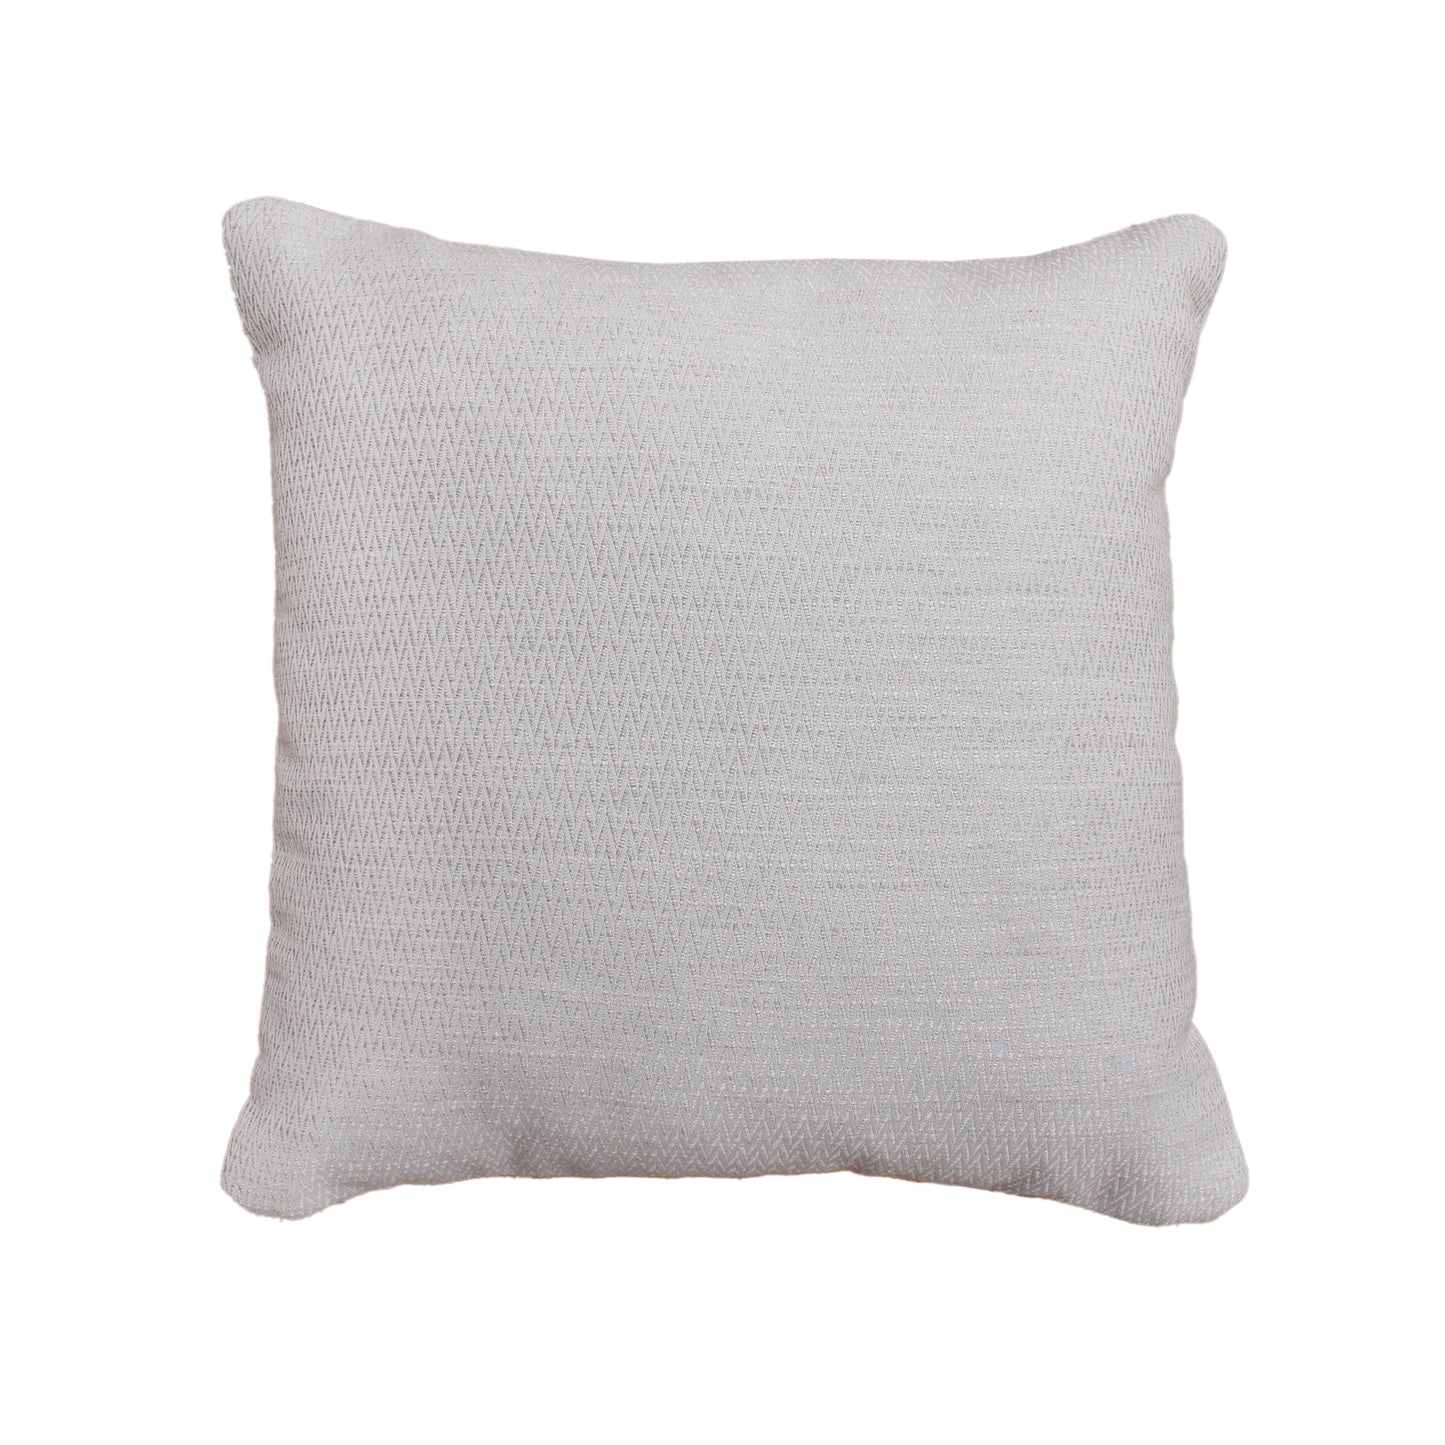 URIEL CUSHION - BLENDED FABRIC